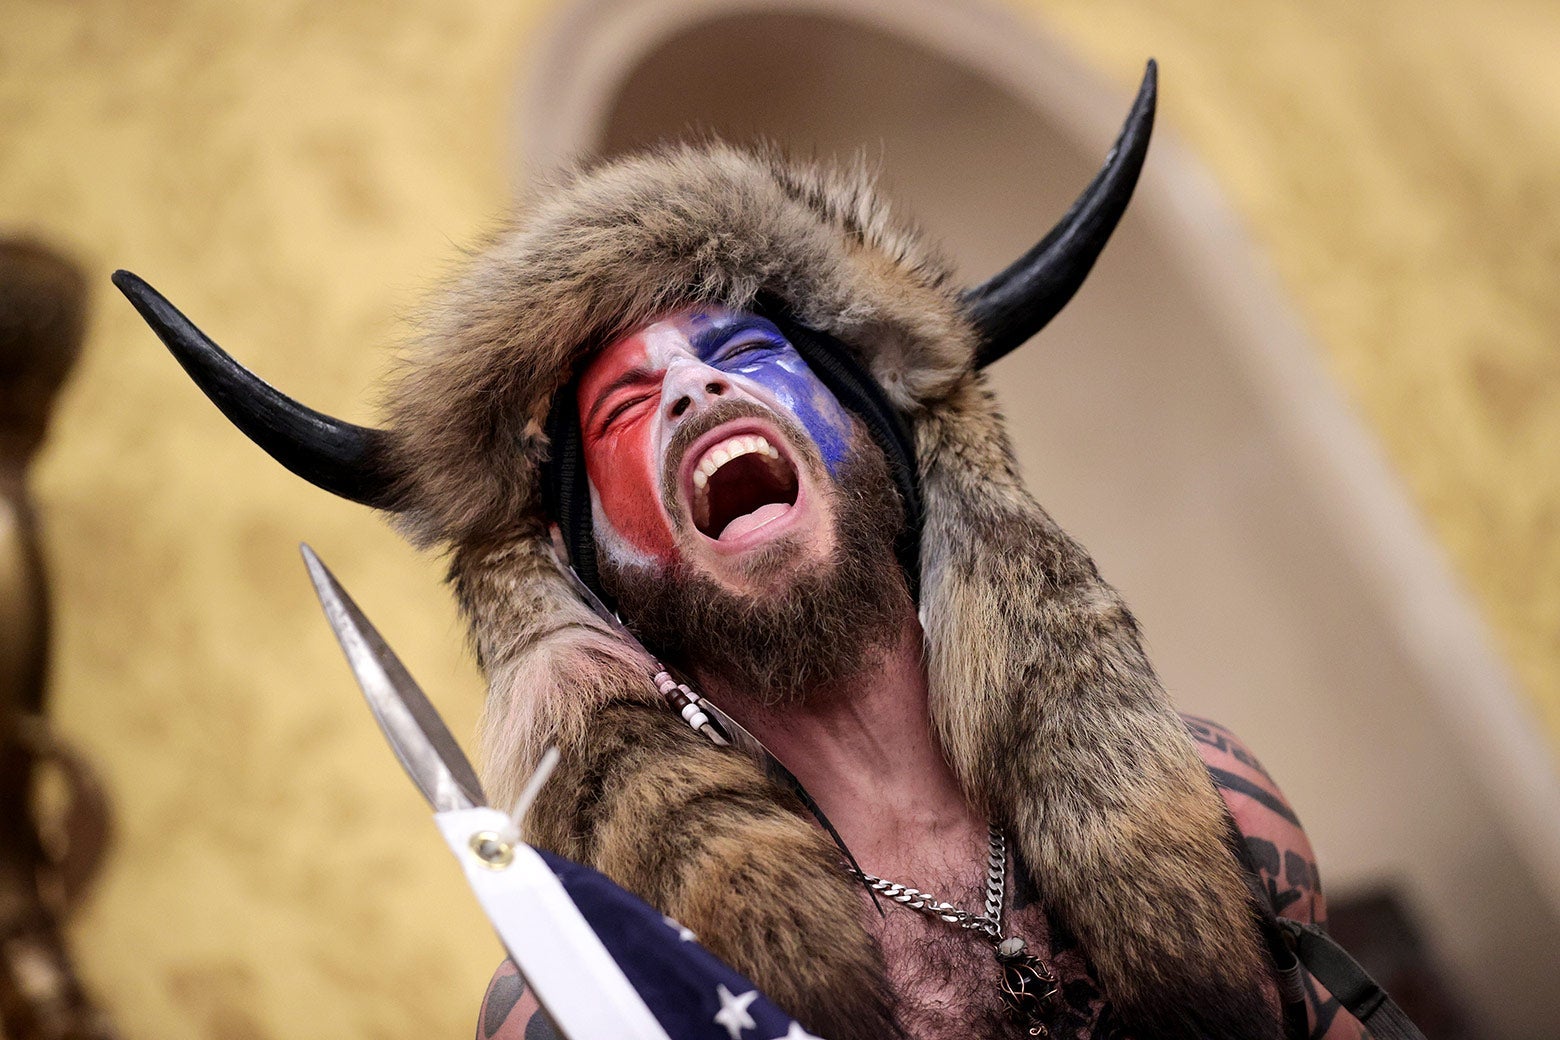 A shirtless, screaming man wearing a raccoon hat with horn screams in the Capitol.